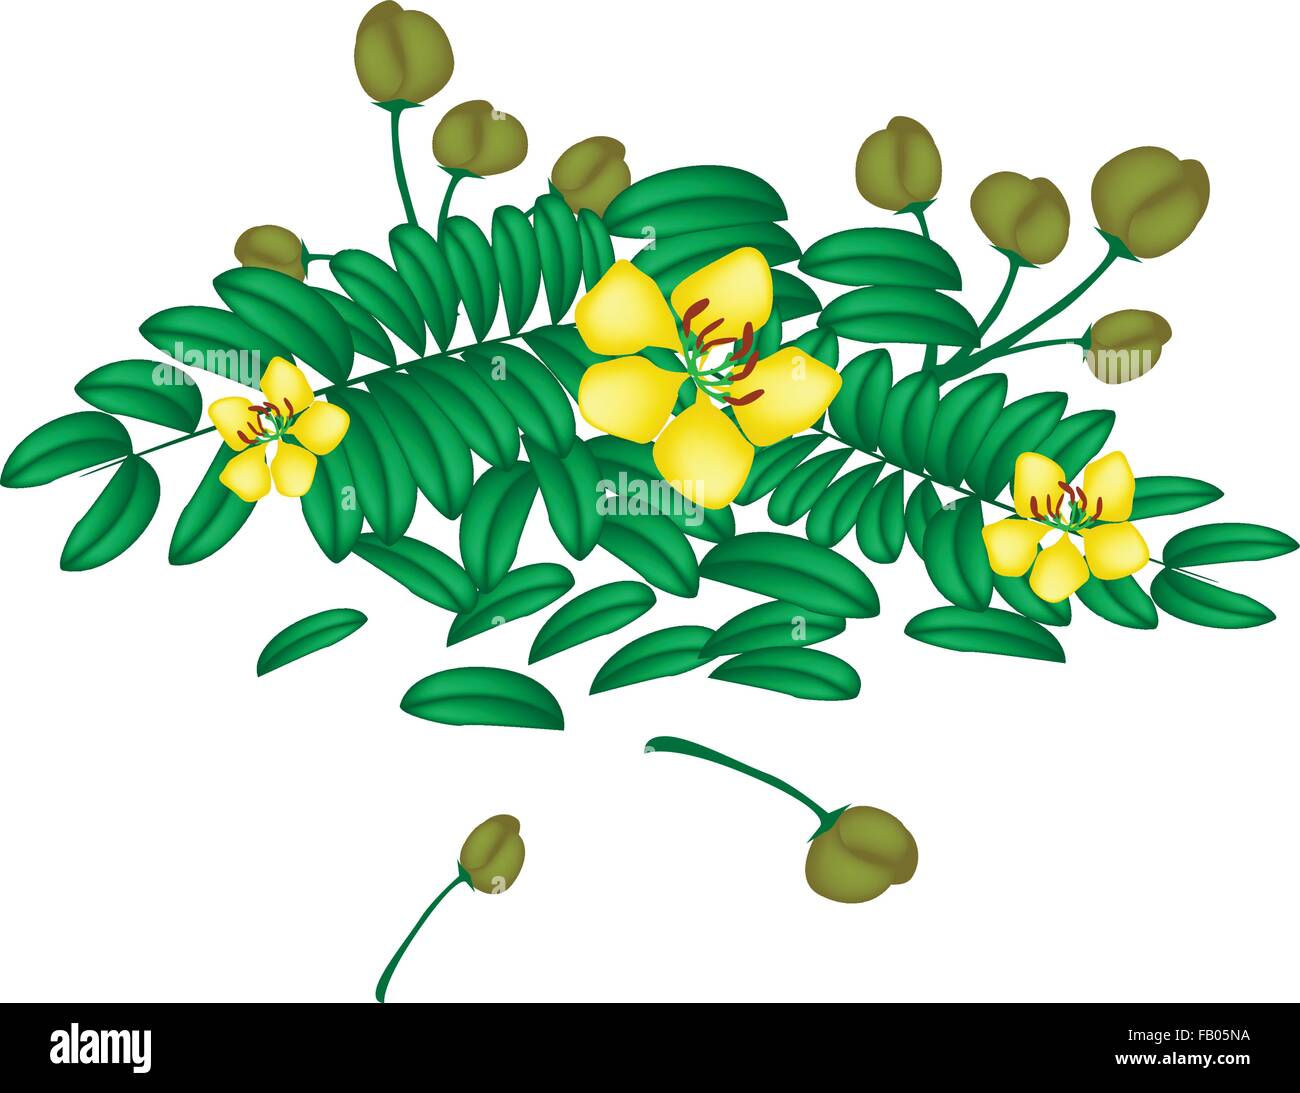 Vegetable and Herb, Vector Illustration Parts of Cassod, Senna Siamea or Thai Copper with Leaves, Blossom and Pods Isolated on W Stock Vector